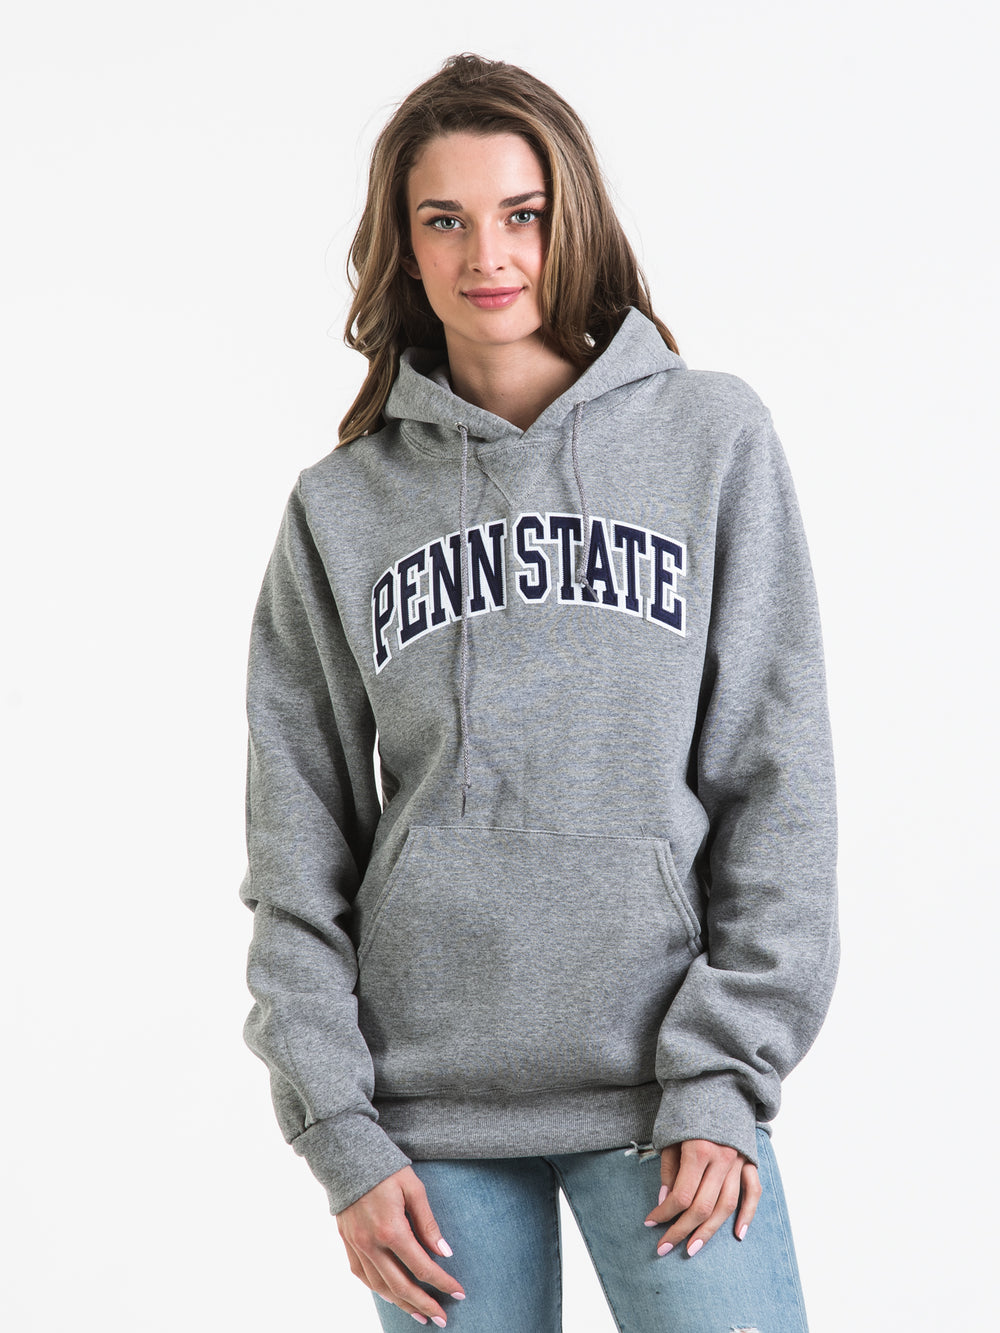 PULL-OVER À CAPUCHE RUSSELL PENN STATEATE - DÉSTOCKAGE